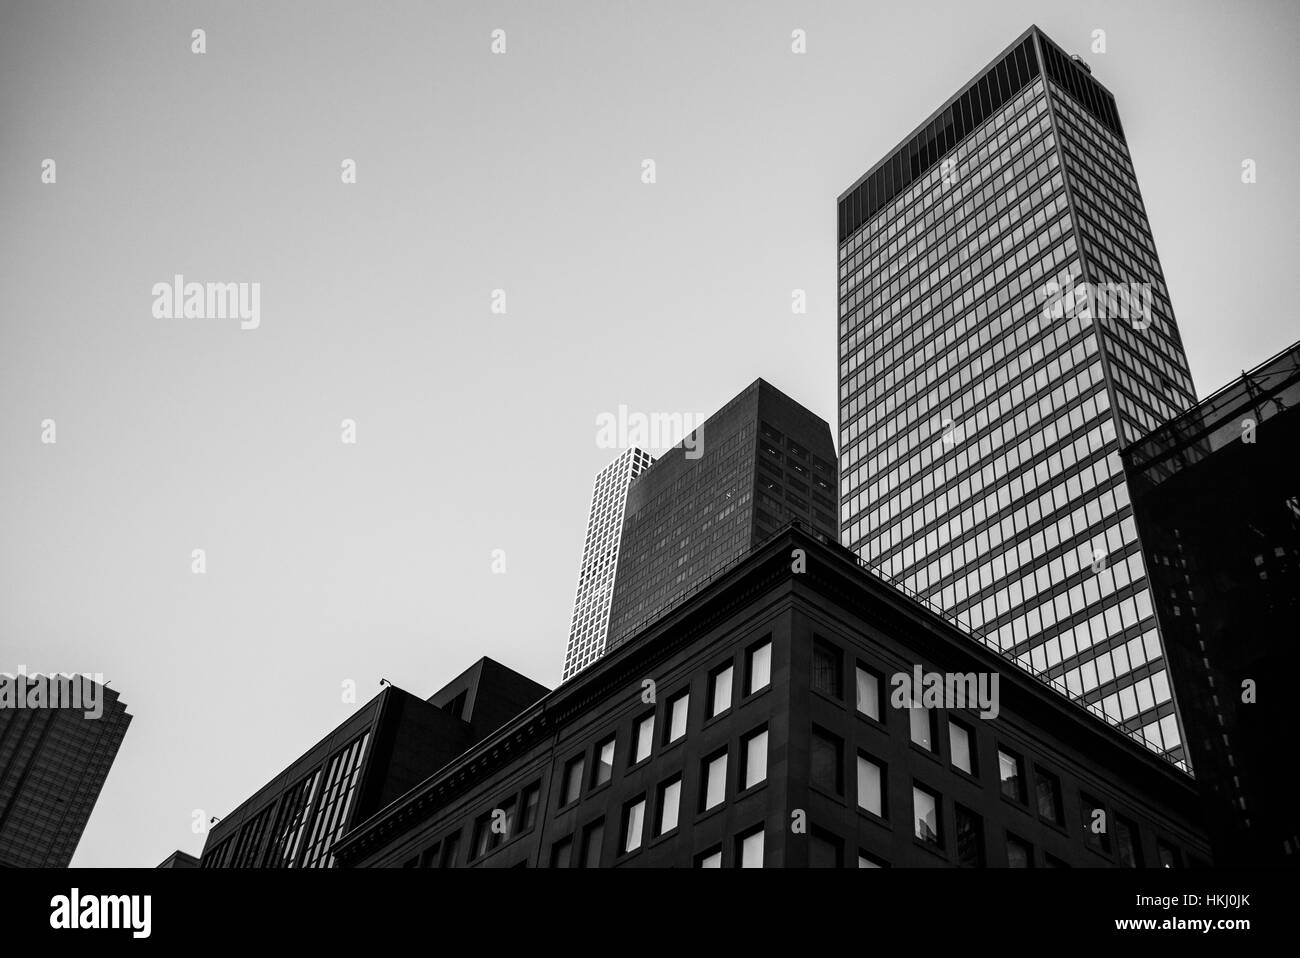 Black and white low angle view of skyscrapers and office buildings; New York City, New York, United States of America Stock Photo